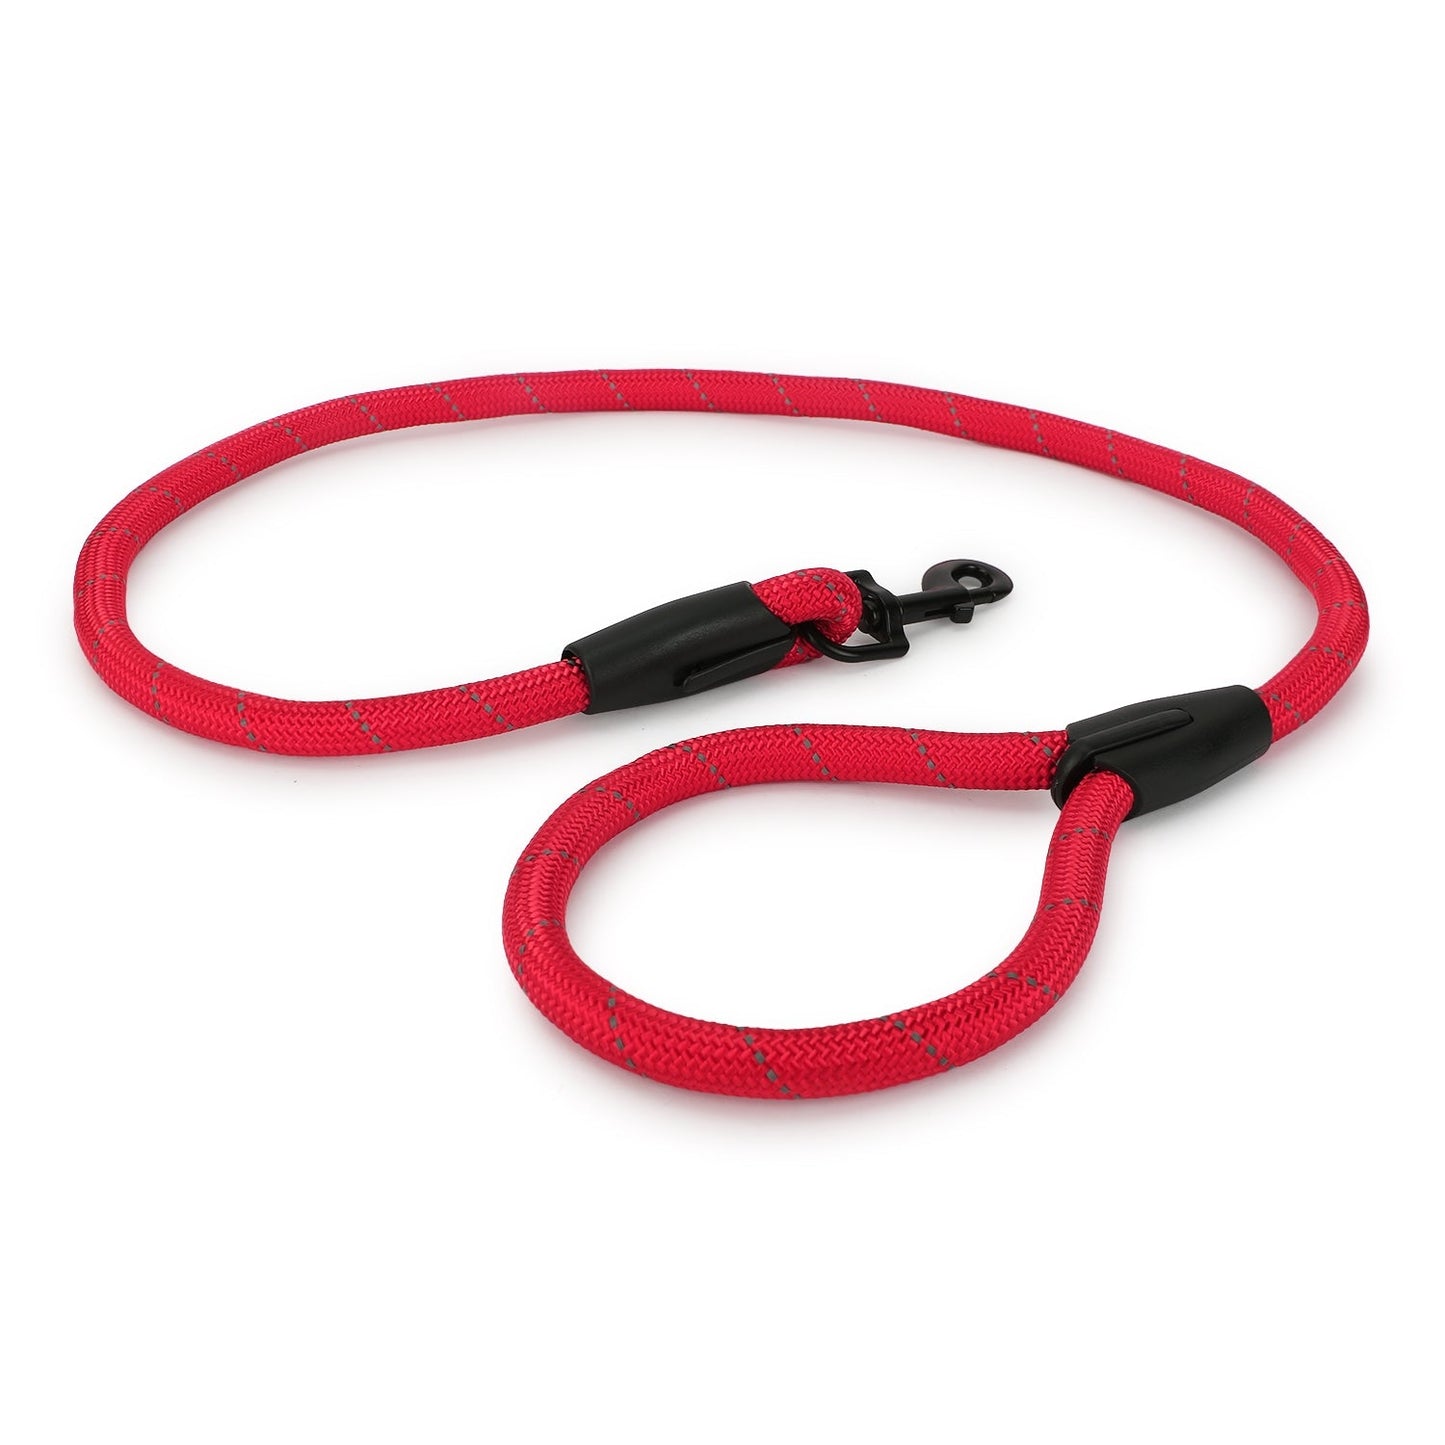 Basil Rope Leash for Dogs, 4 Feet (Solid Red)